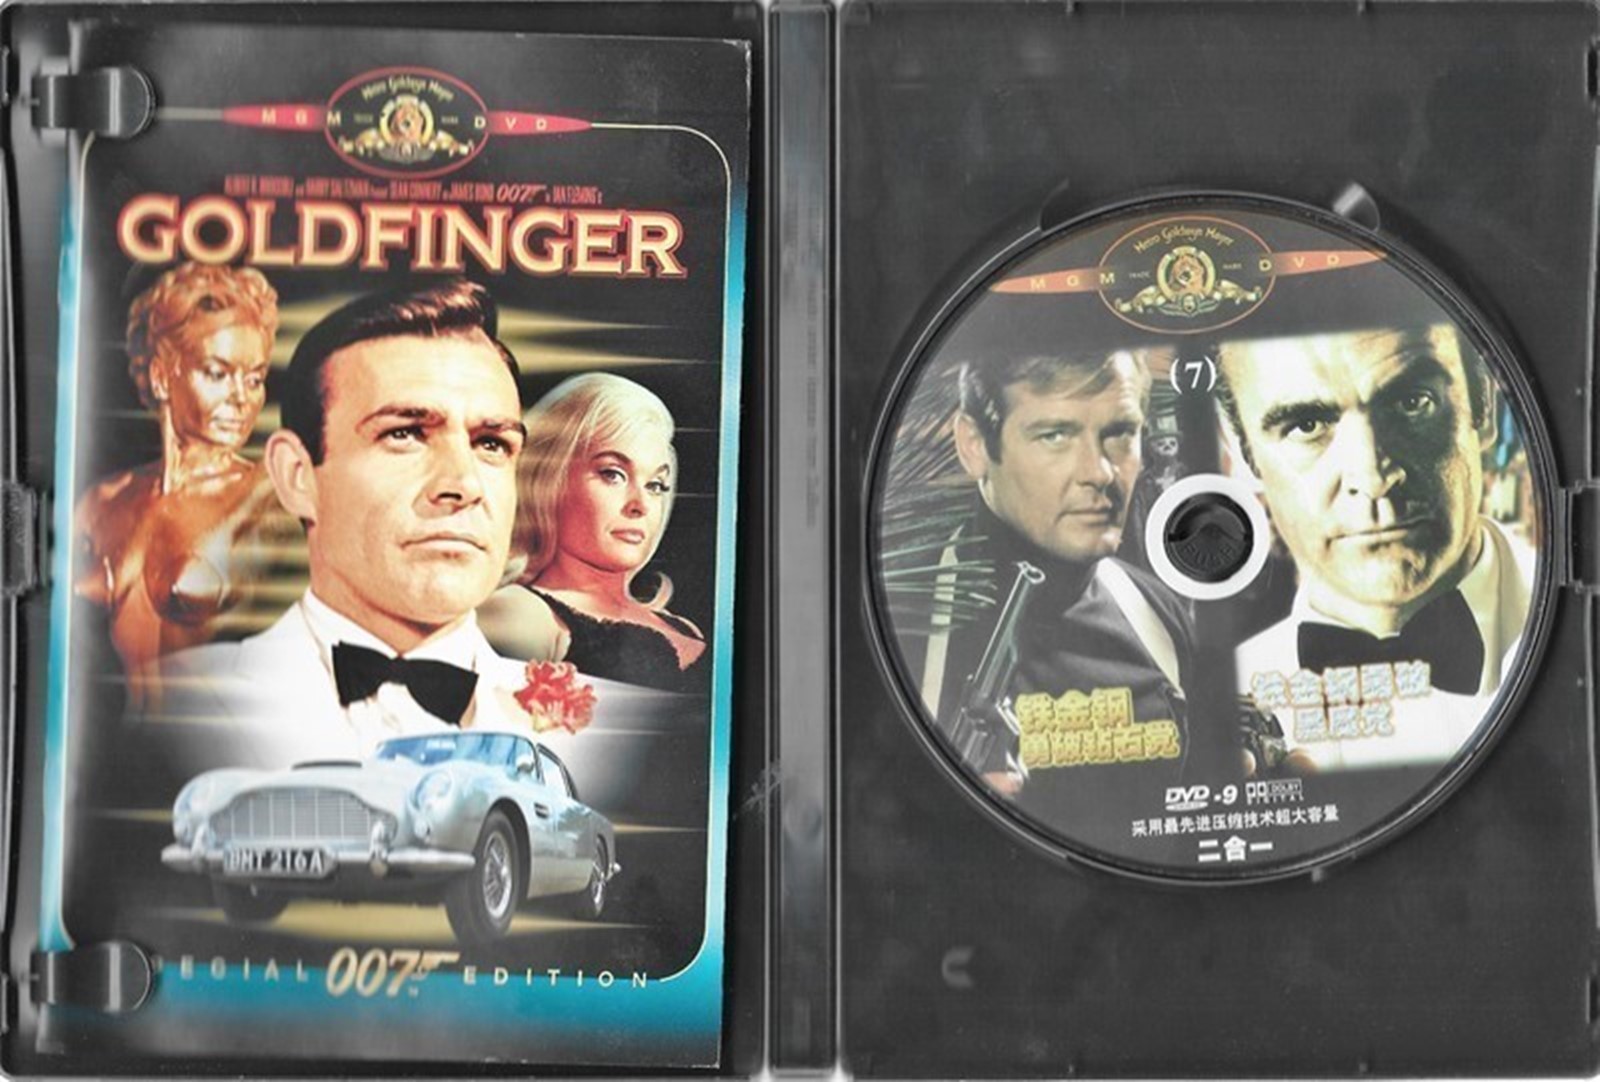 Shirley Eaton signed DVD sleeve from Goldfinger includes DVD and insert. - Image 2 of 2